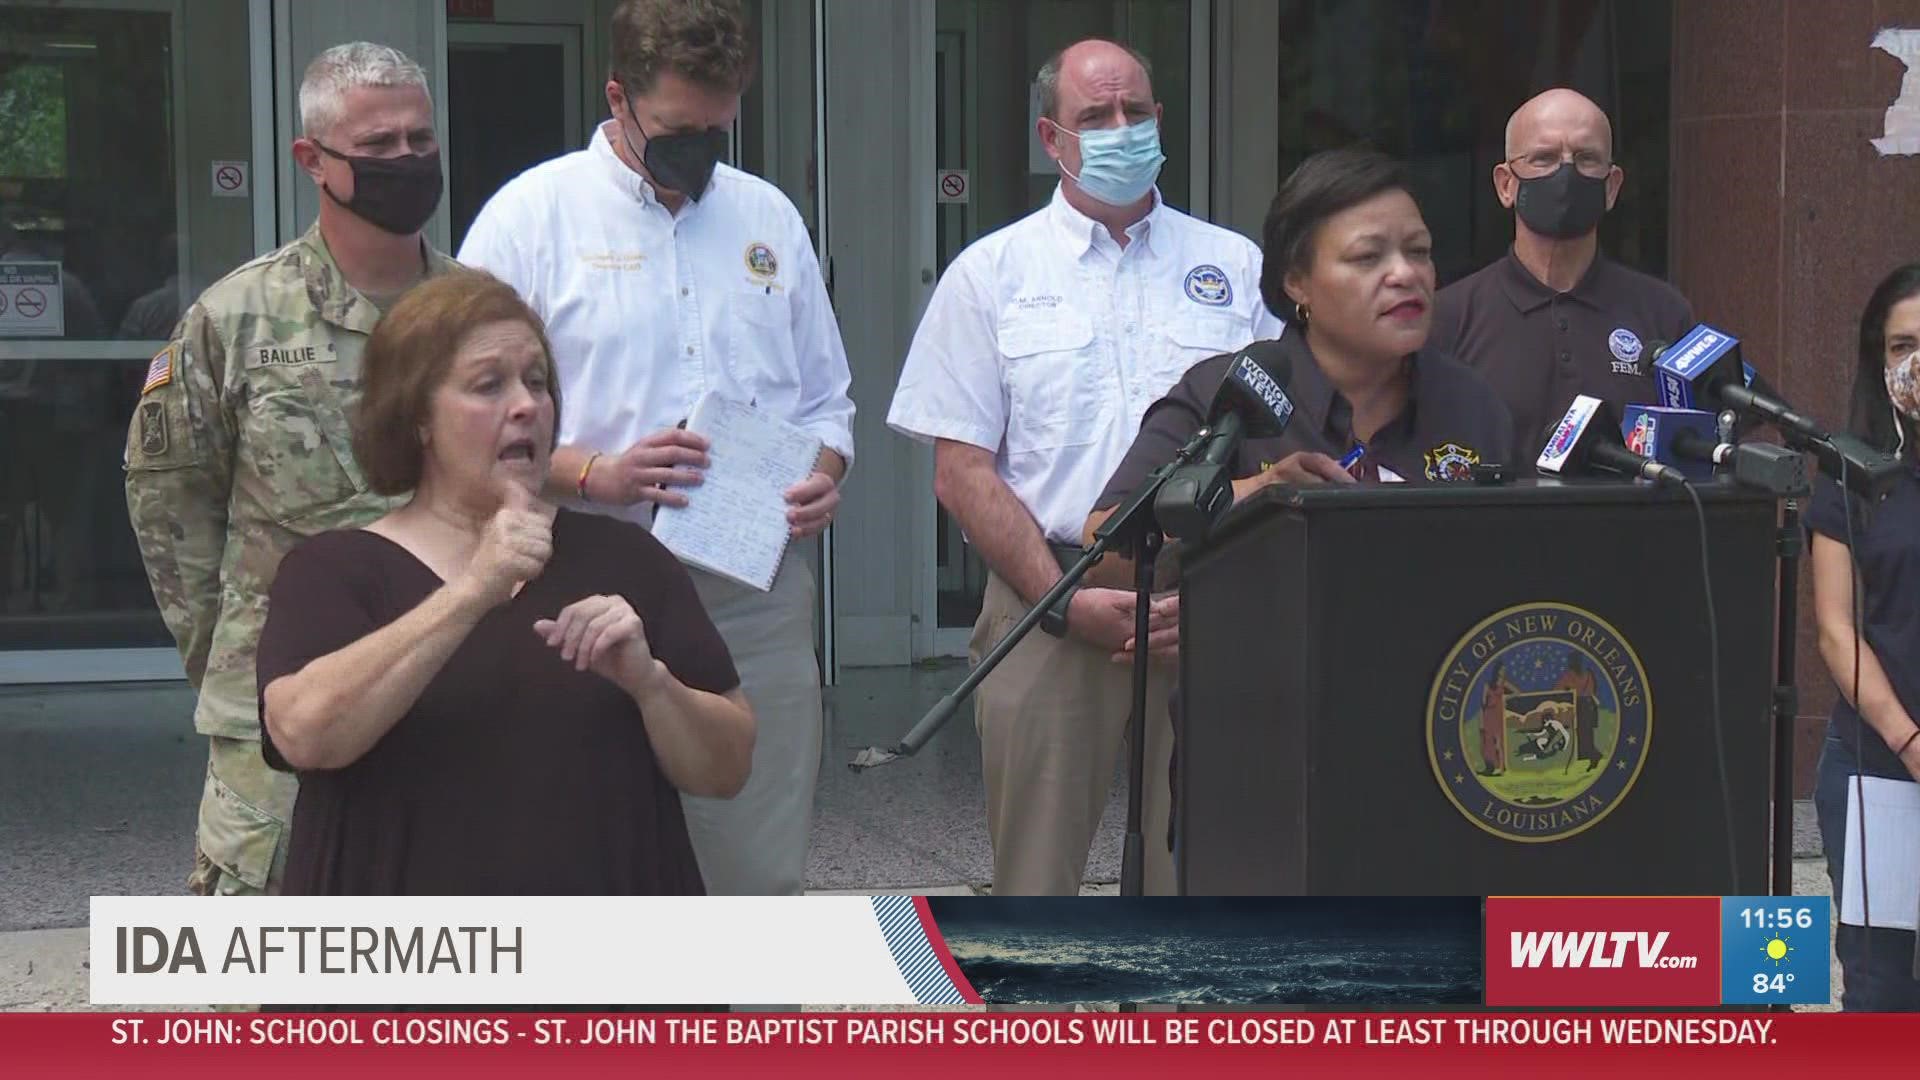 Mayor LaToya Cantrell discusses the city's response to damage and power outages caused by Hurricane Ida, including opening food distribution and cooling centers.